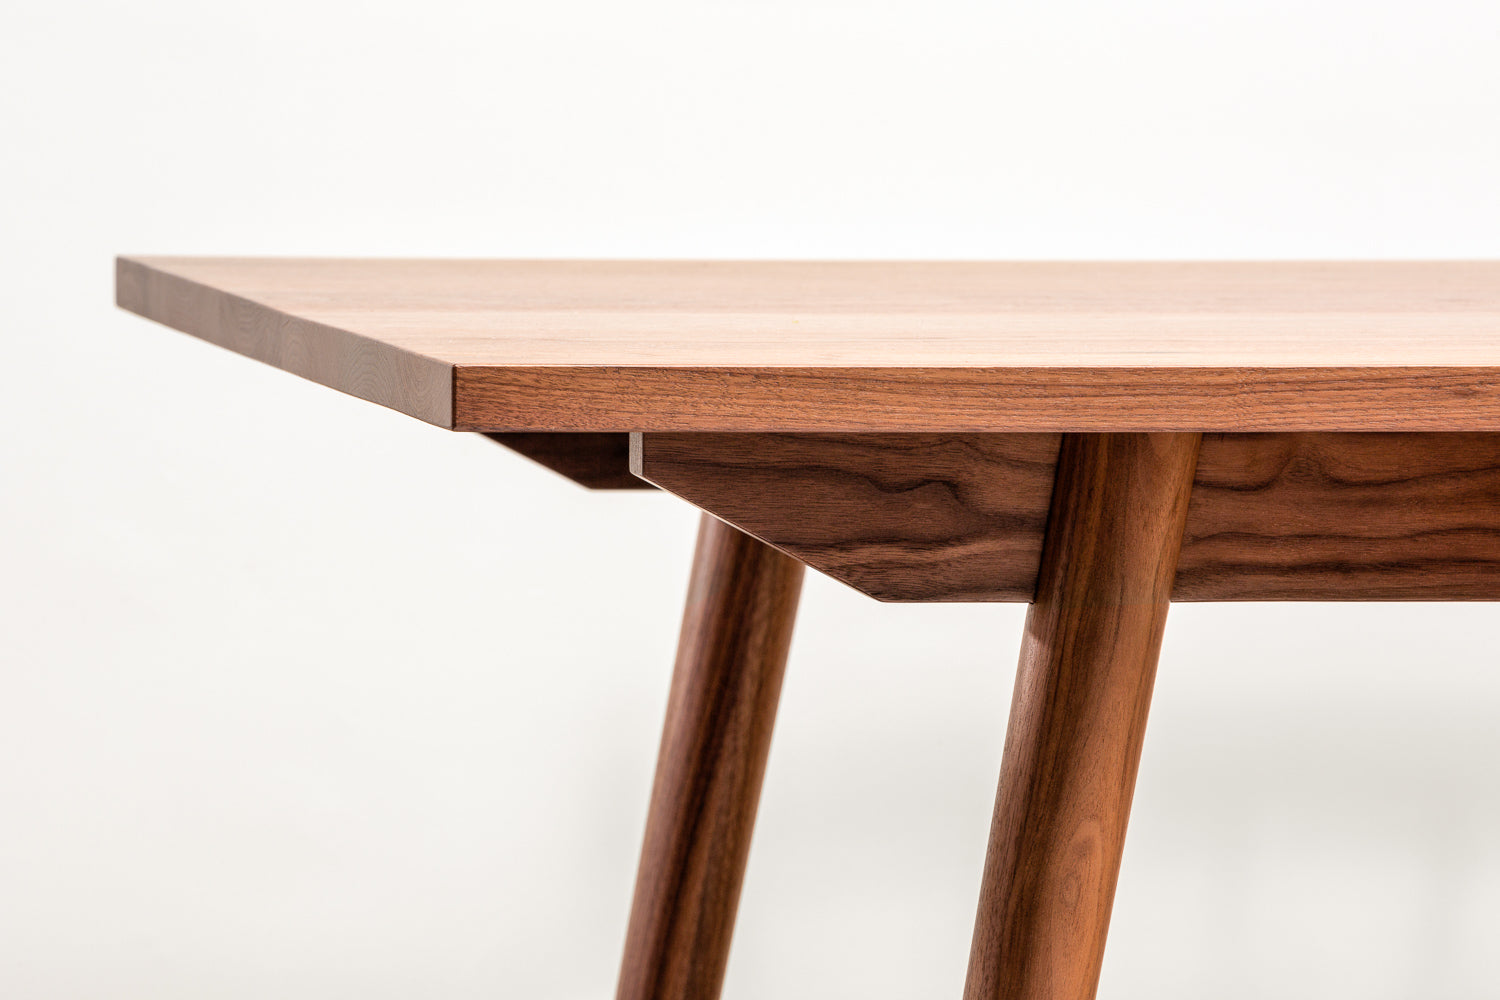 Scandinavian inspired walnut dining table from Chilton Furniture.